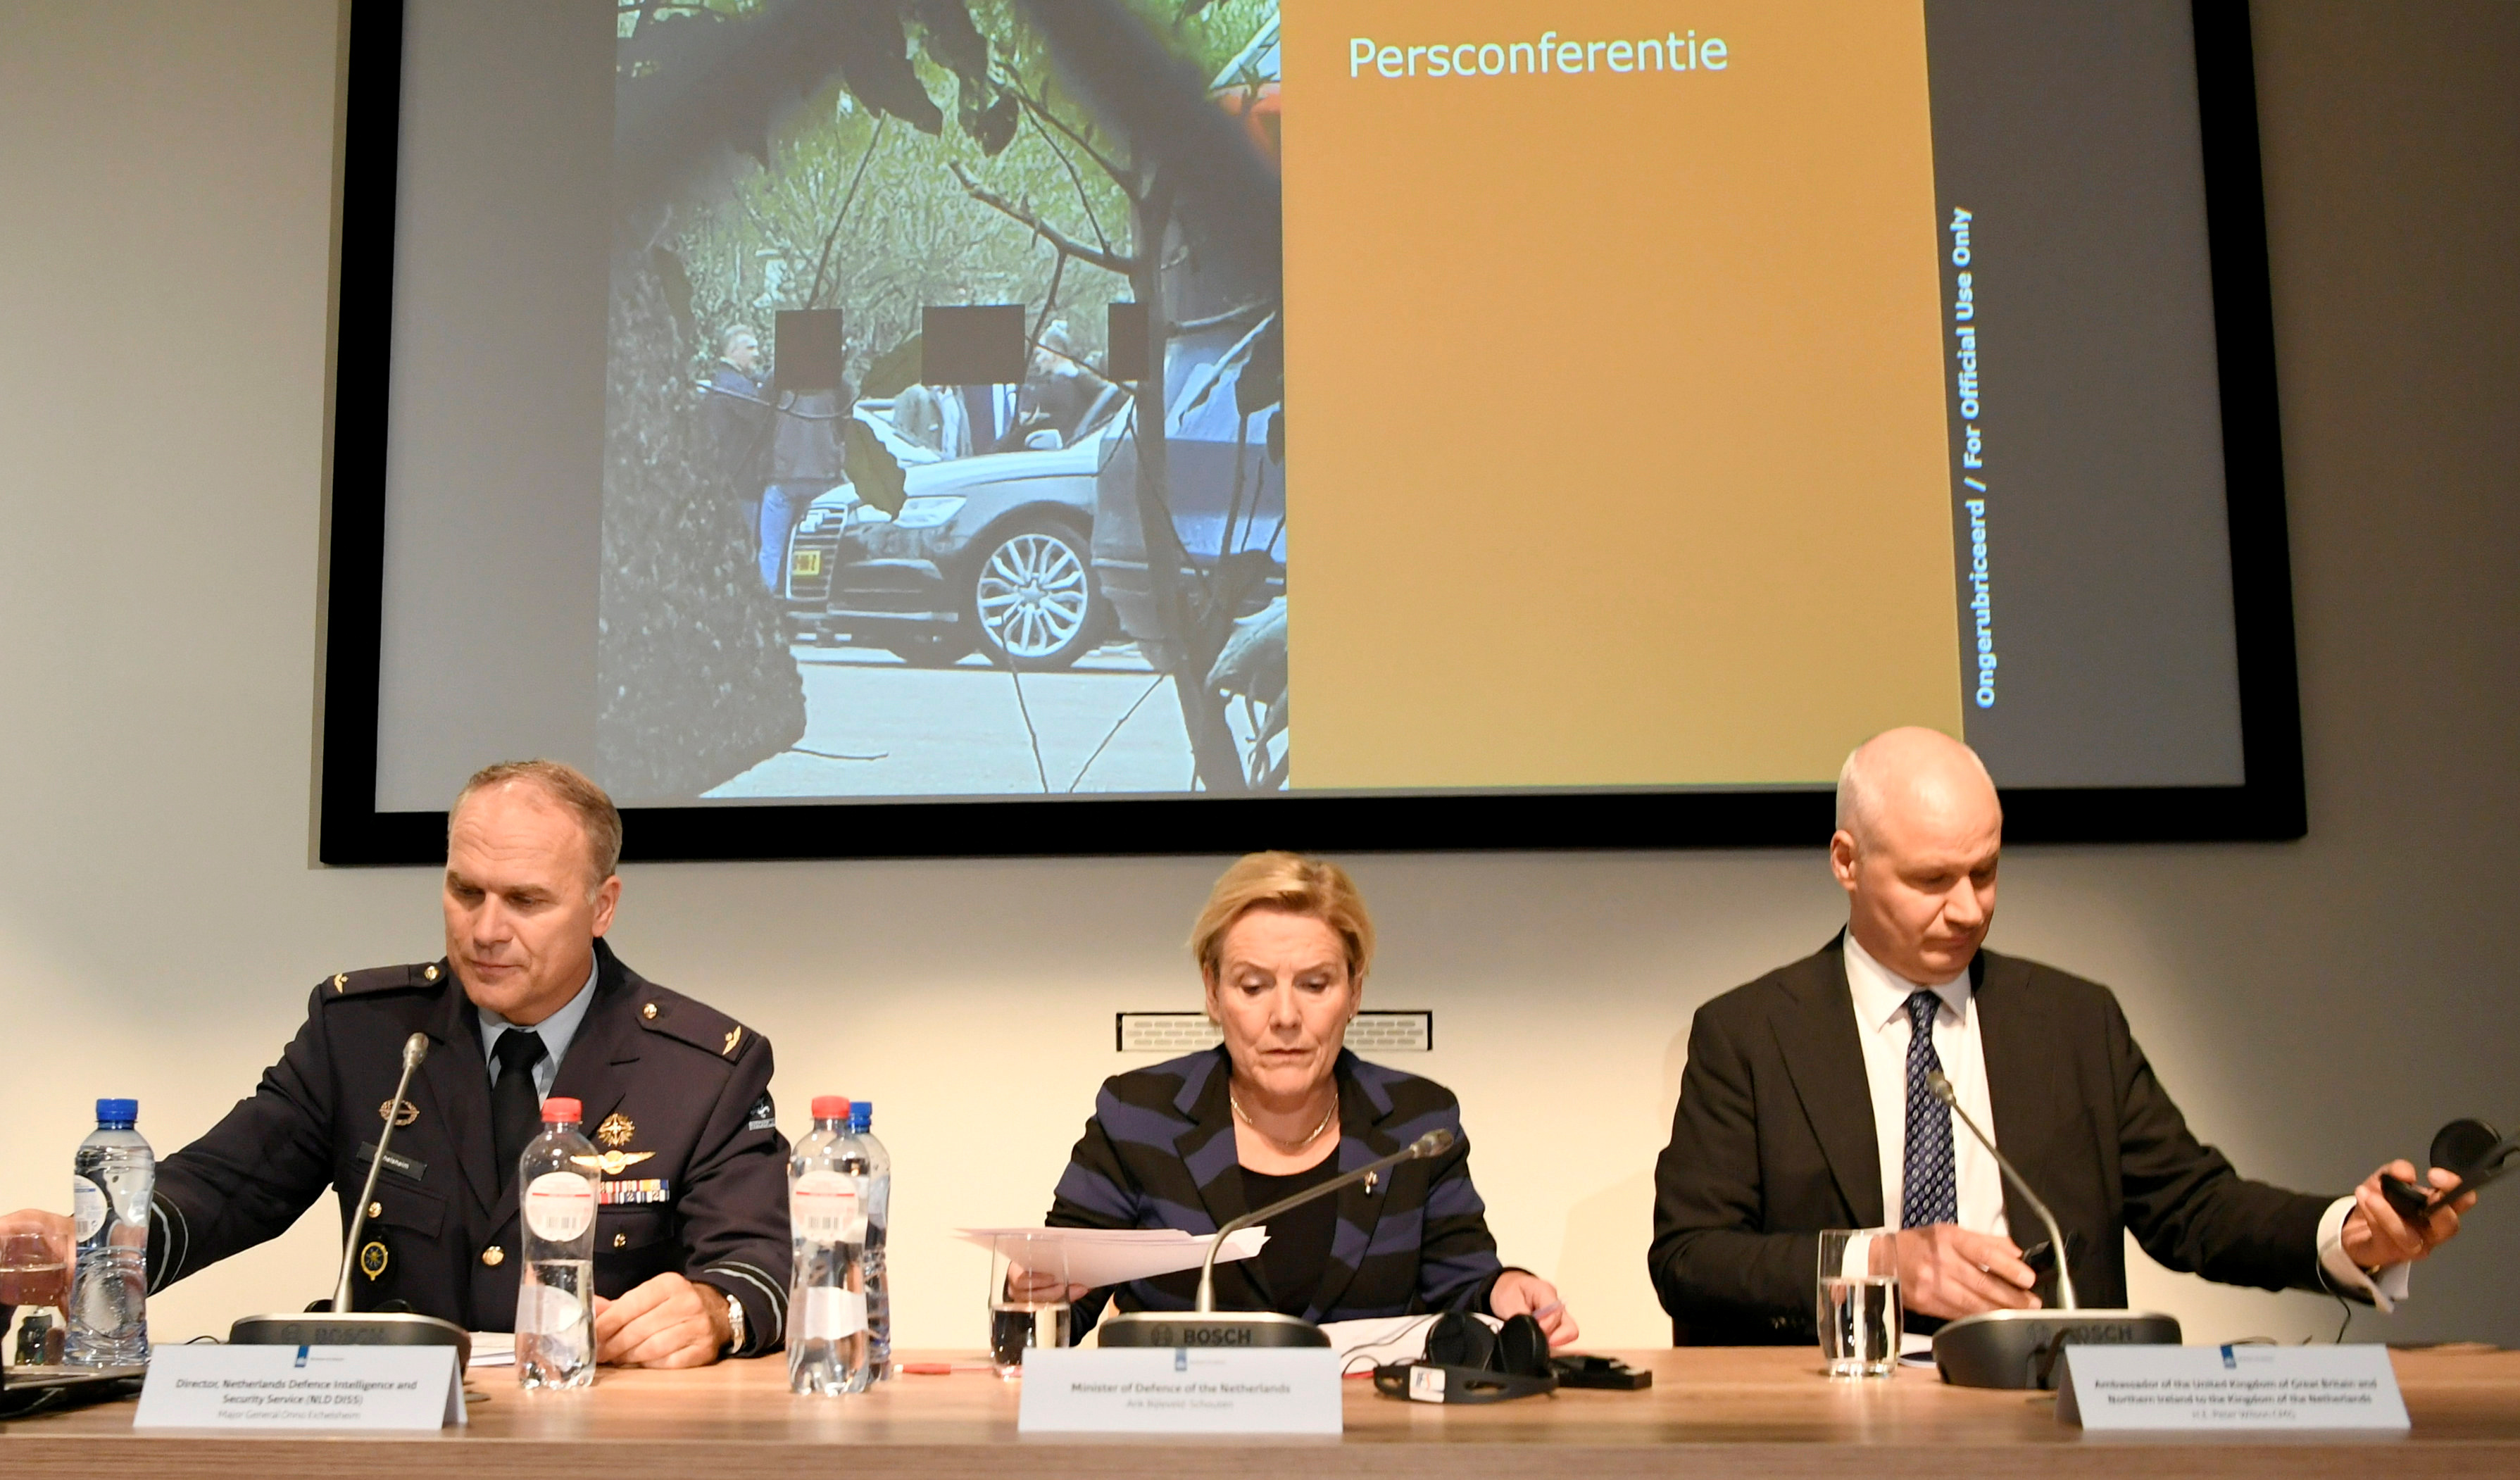 Dutch Minister of Defence Ank Bijleveld, general Onno Eichelsheim, director of Netherlands Defence Intelligence and Security Service and British Ambassador to the Netherlands Peter Wilson attend a news conference in The Hague on 4October 2018. Piroschka van de Wouw via Reuters.